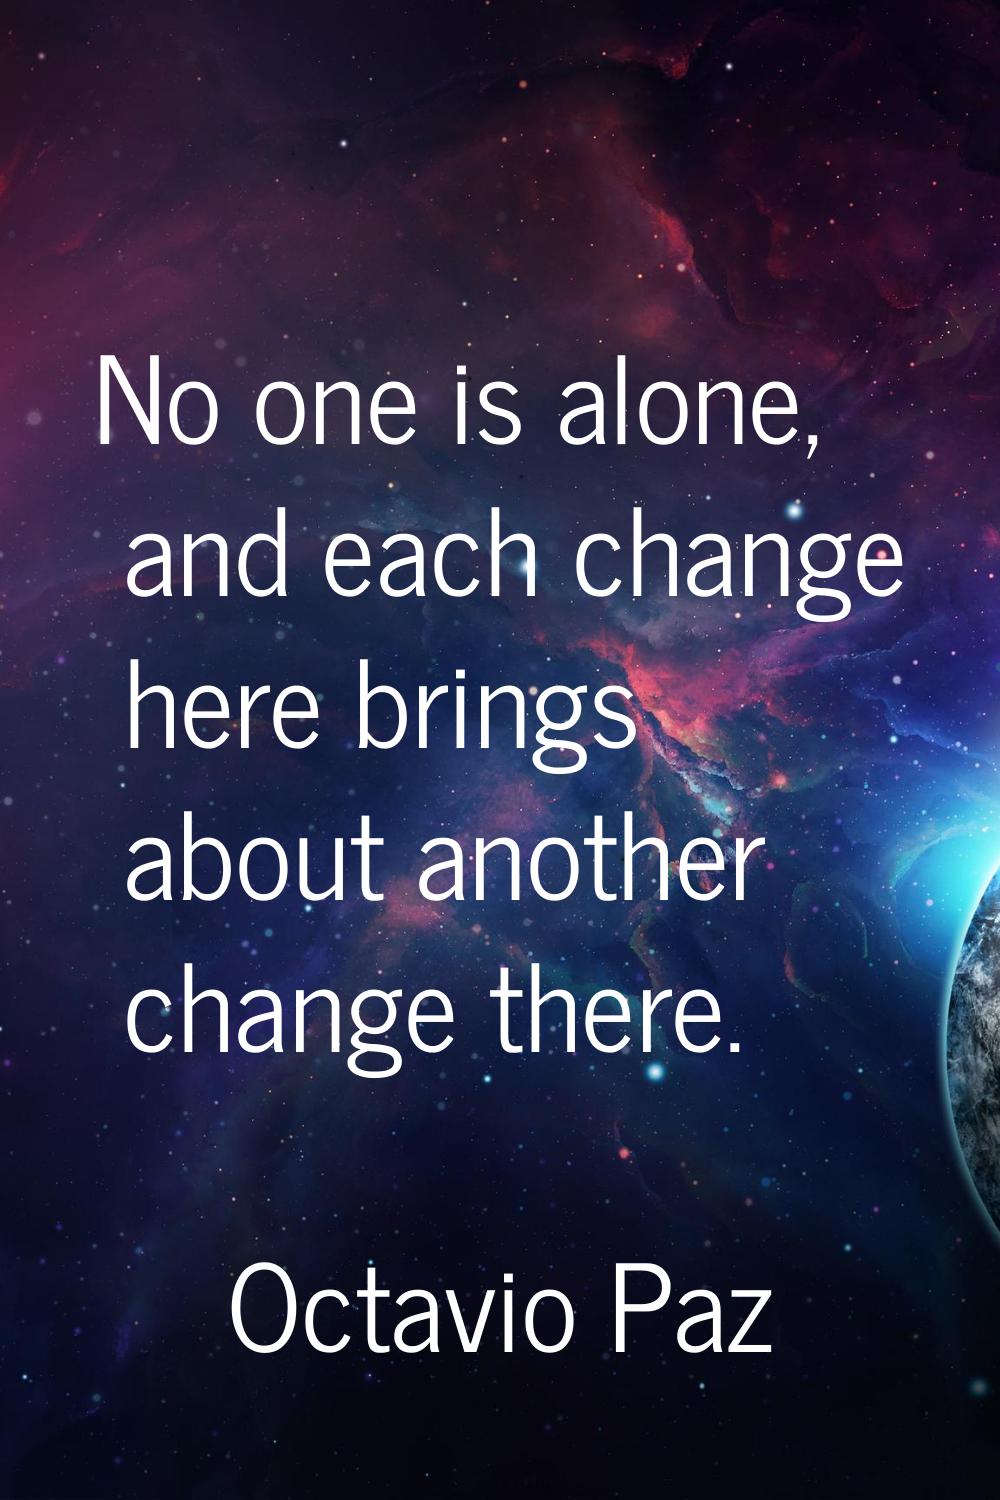 No one is alone, and each change here brings about another change there.